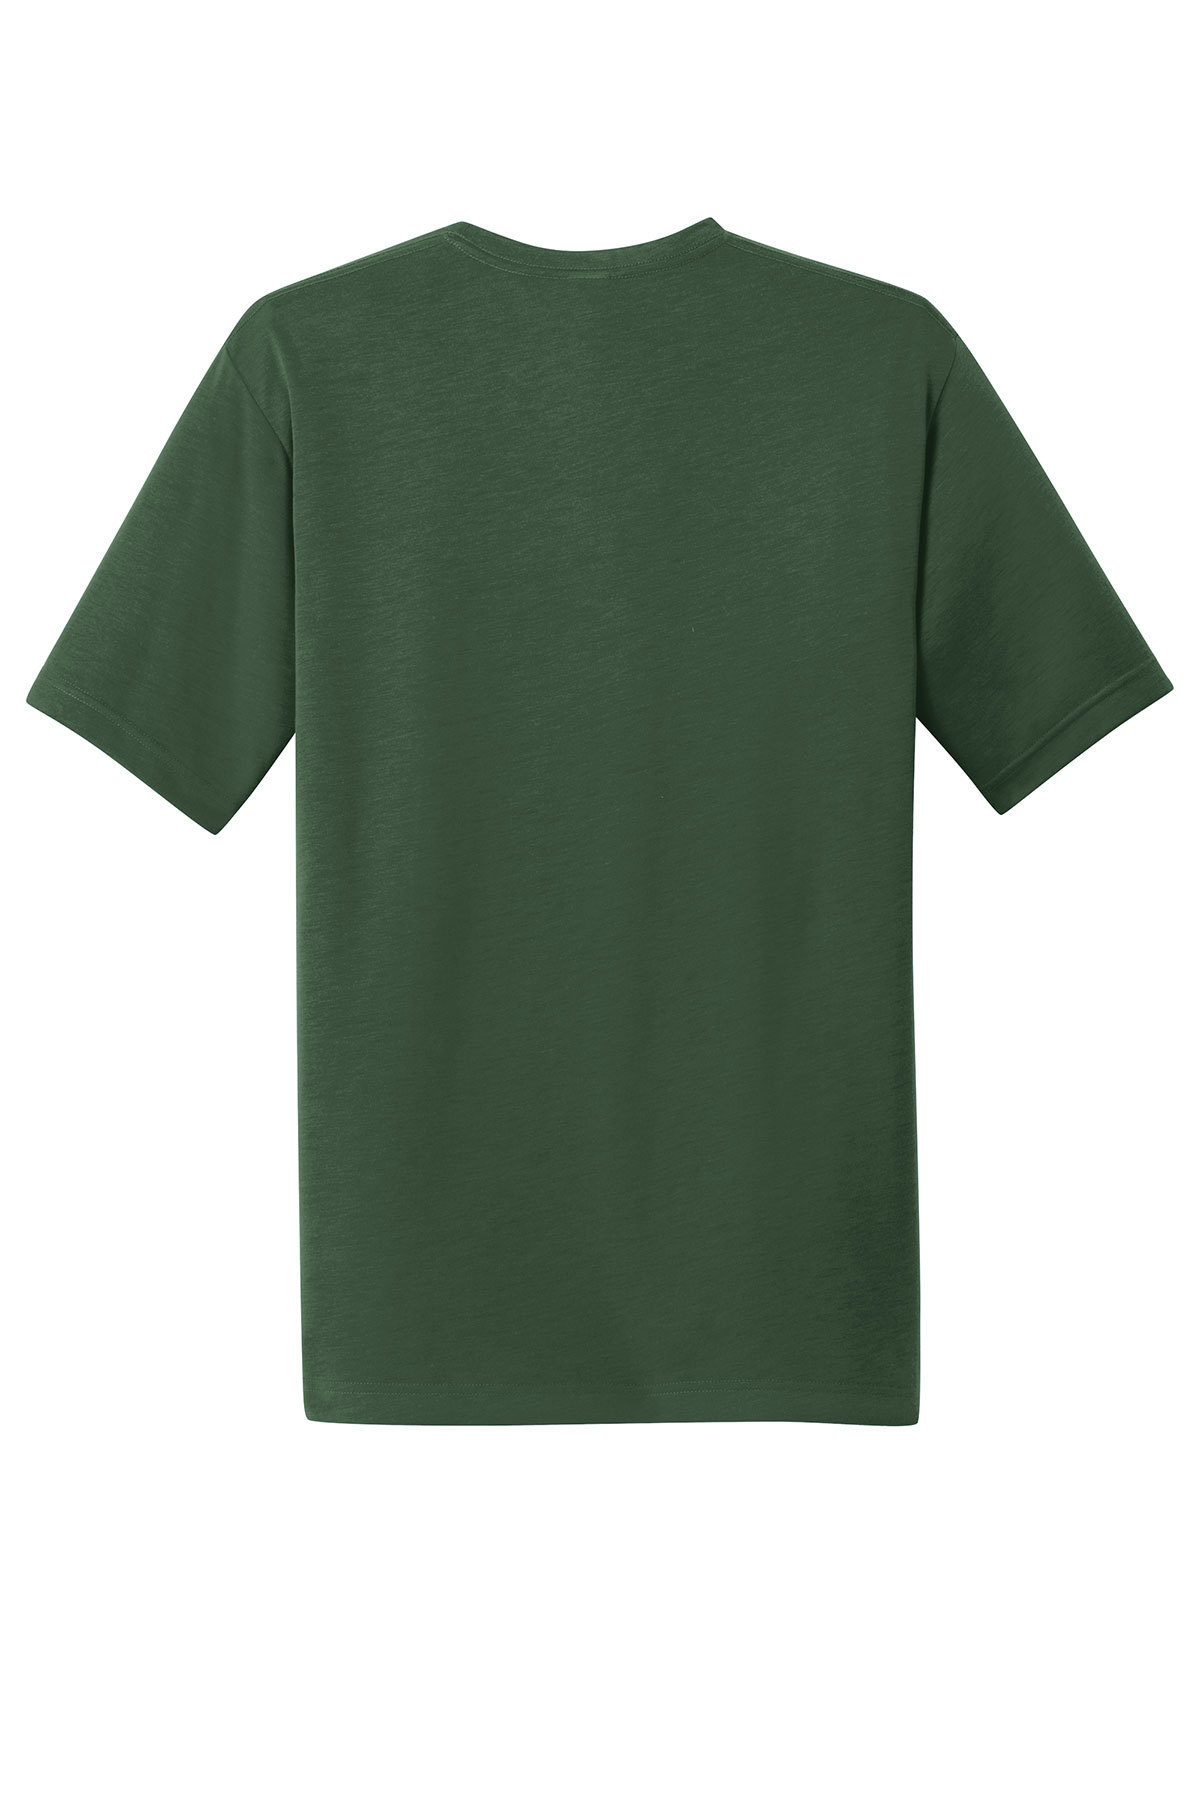 Sport-Tek PosiCharge Competitor™ Cotton Touch™ Tee | Product | SanMar